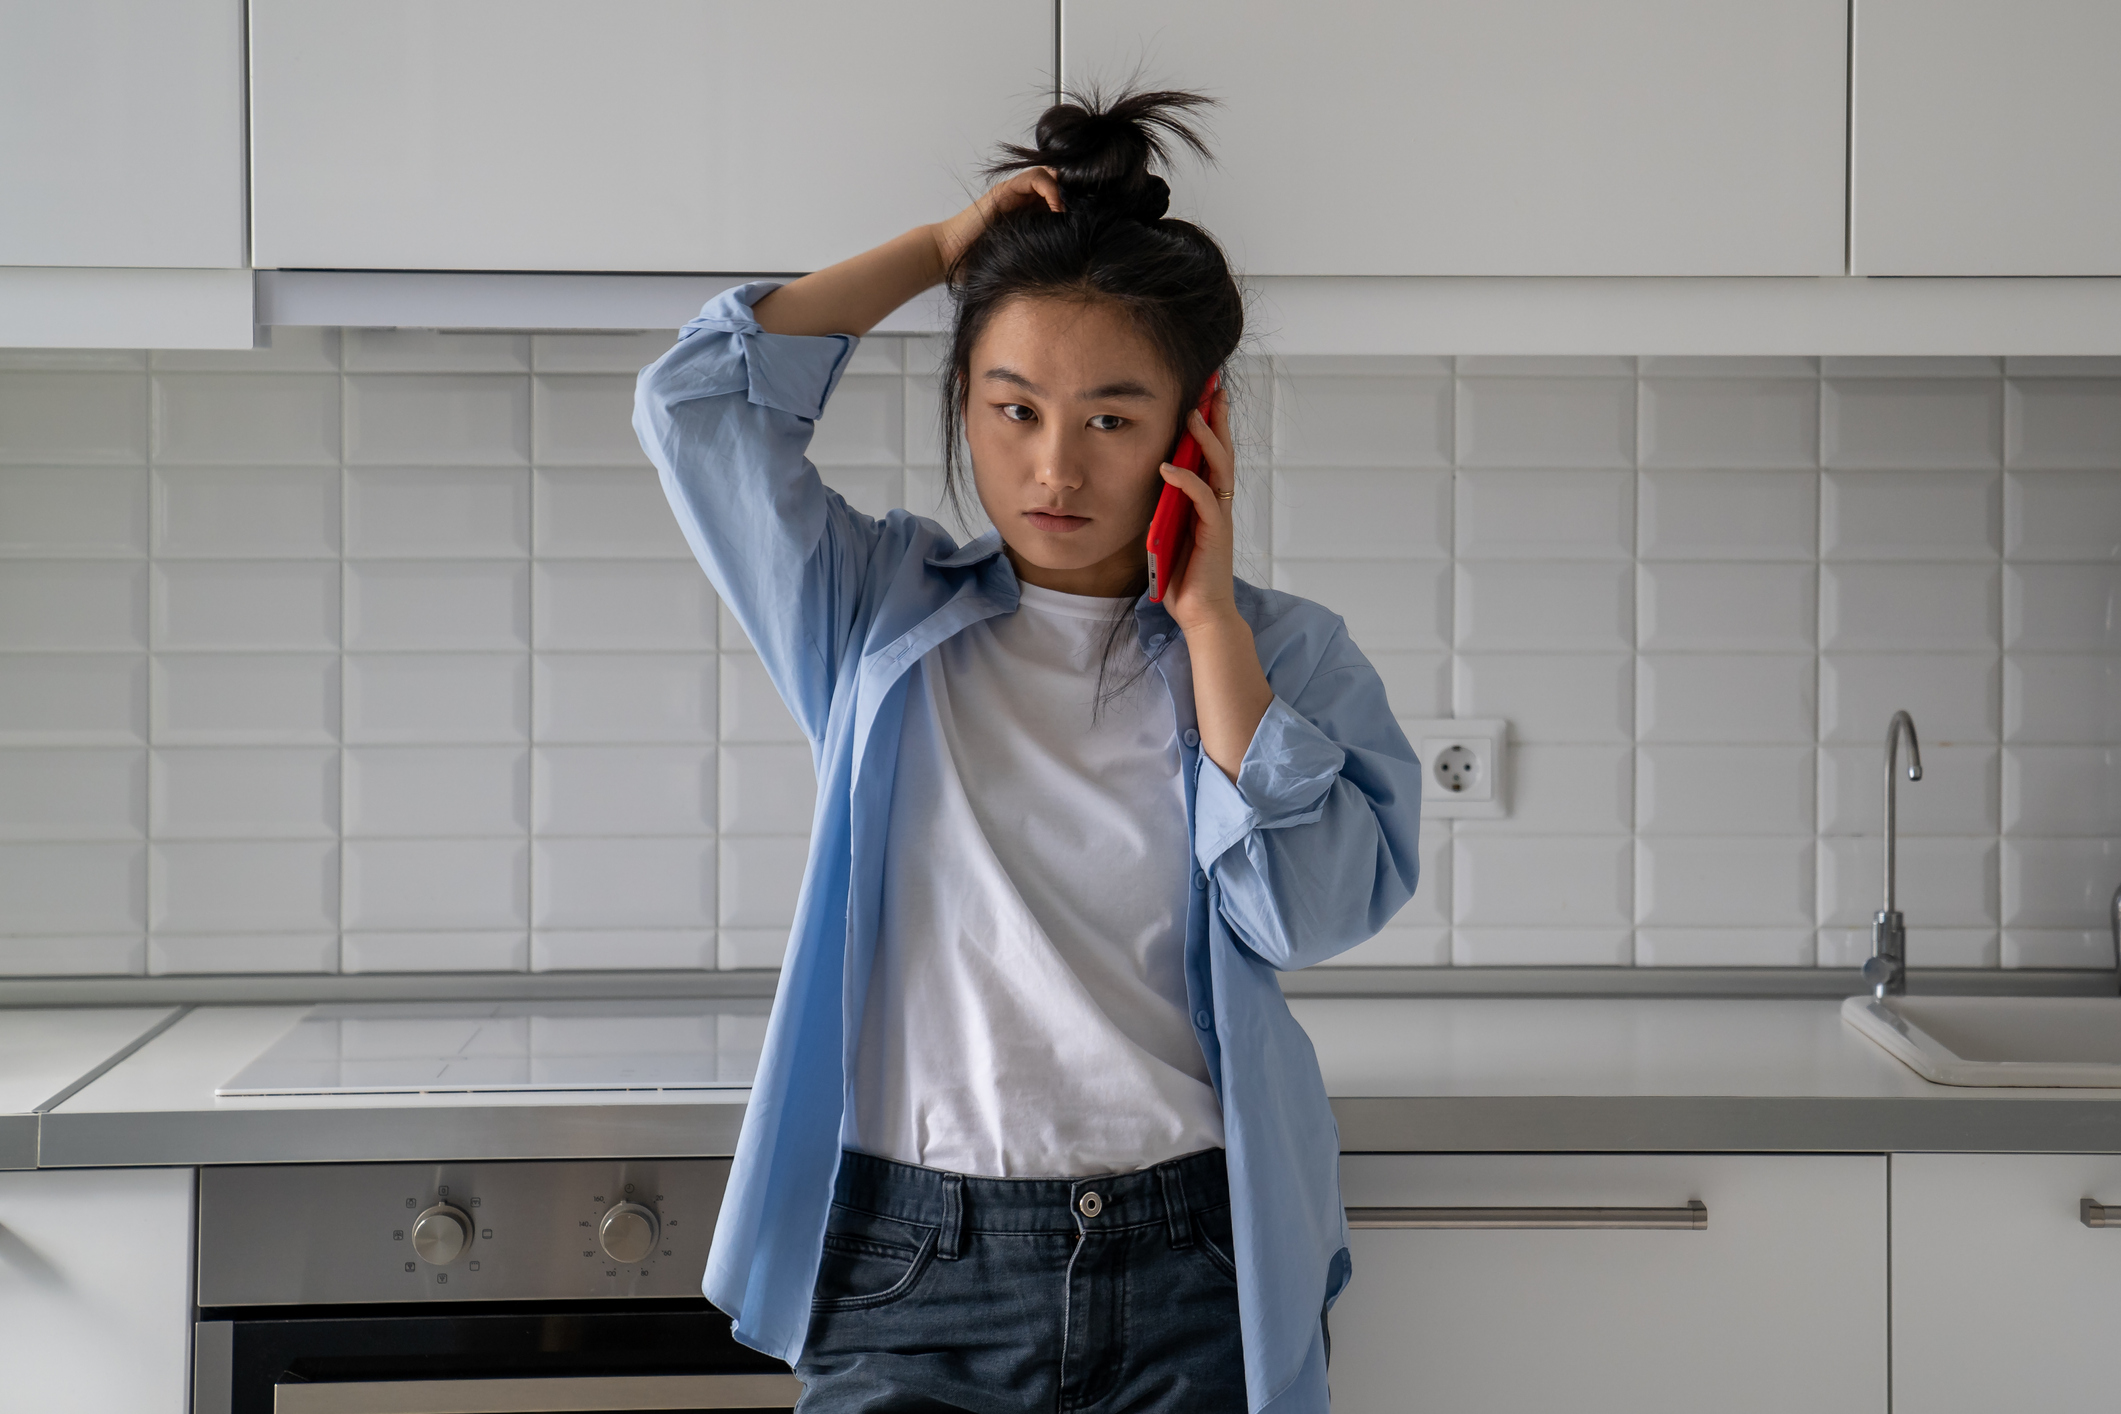 A frustrated young woman rubs her head while standing anxiously in her kitchen, trying to understand what someone says over the phone